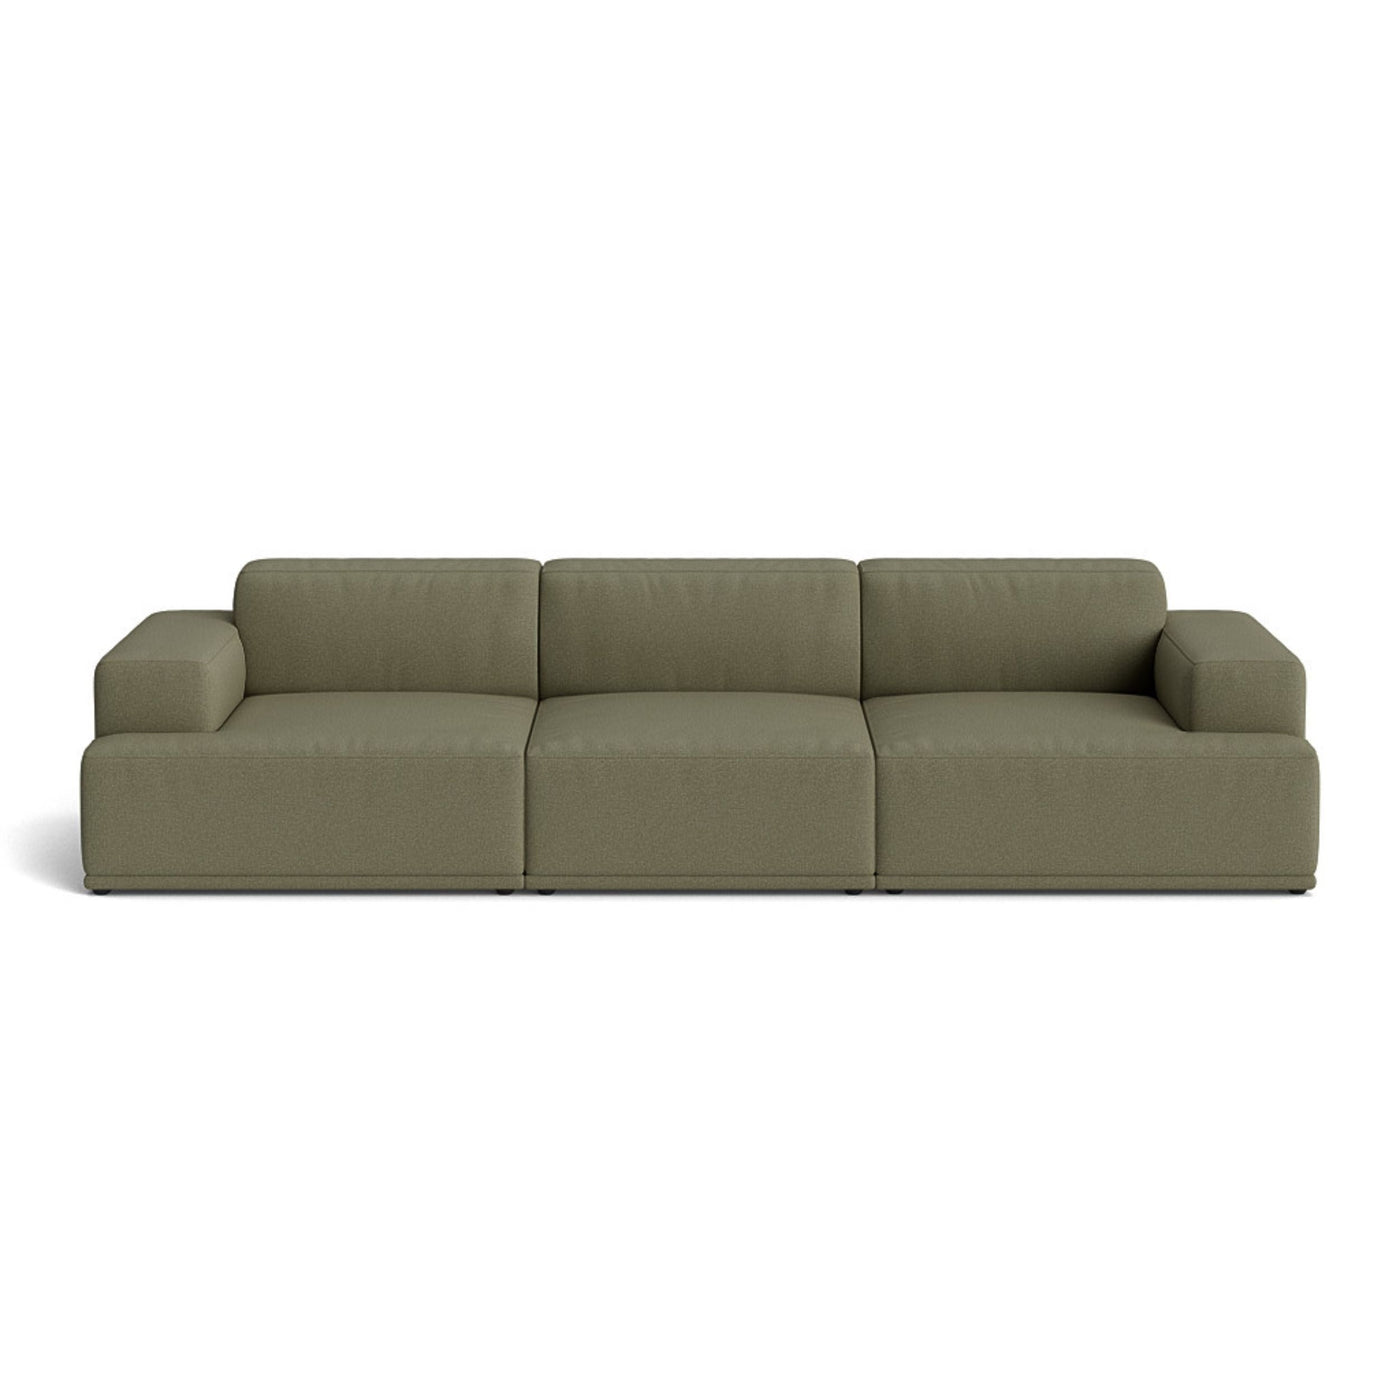 Muuto Connect Soft Modular 3 Seater Sofa, configuration 1. Made-to-order from someday designs. #colour_clay-17